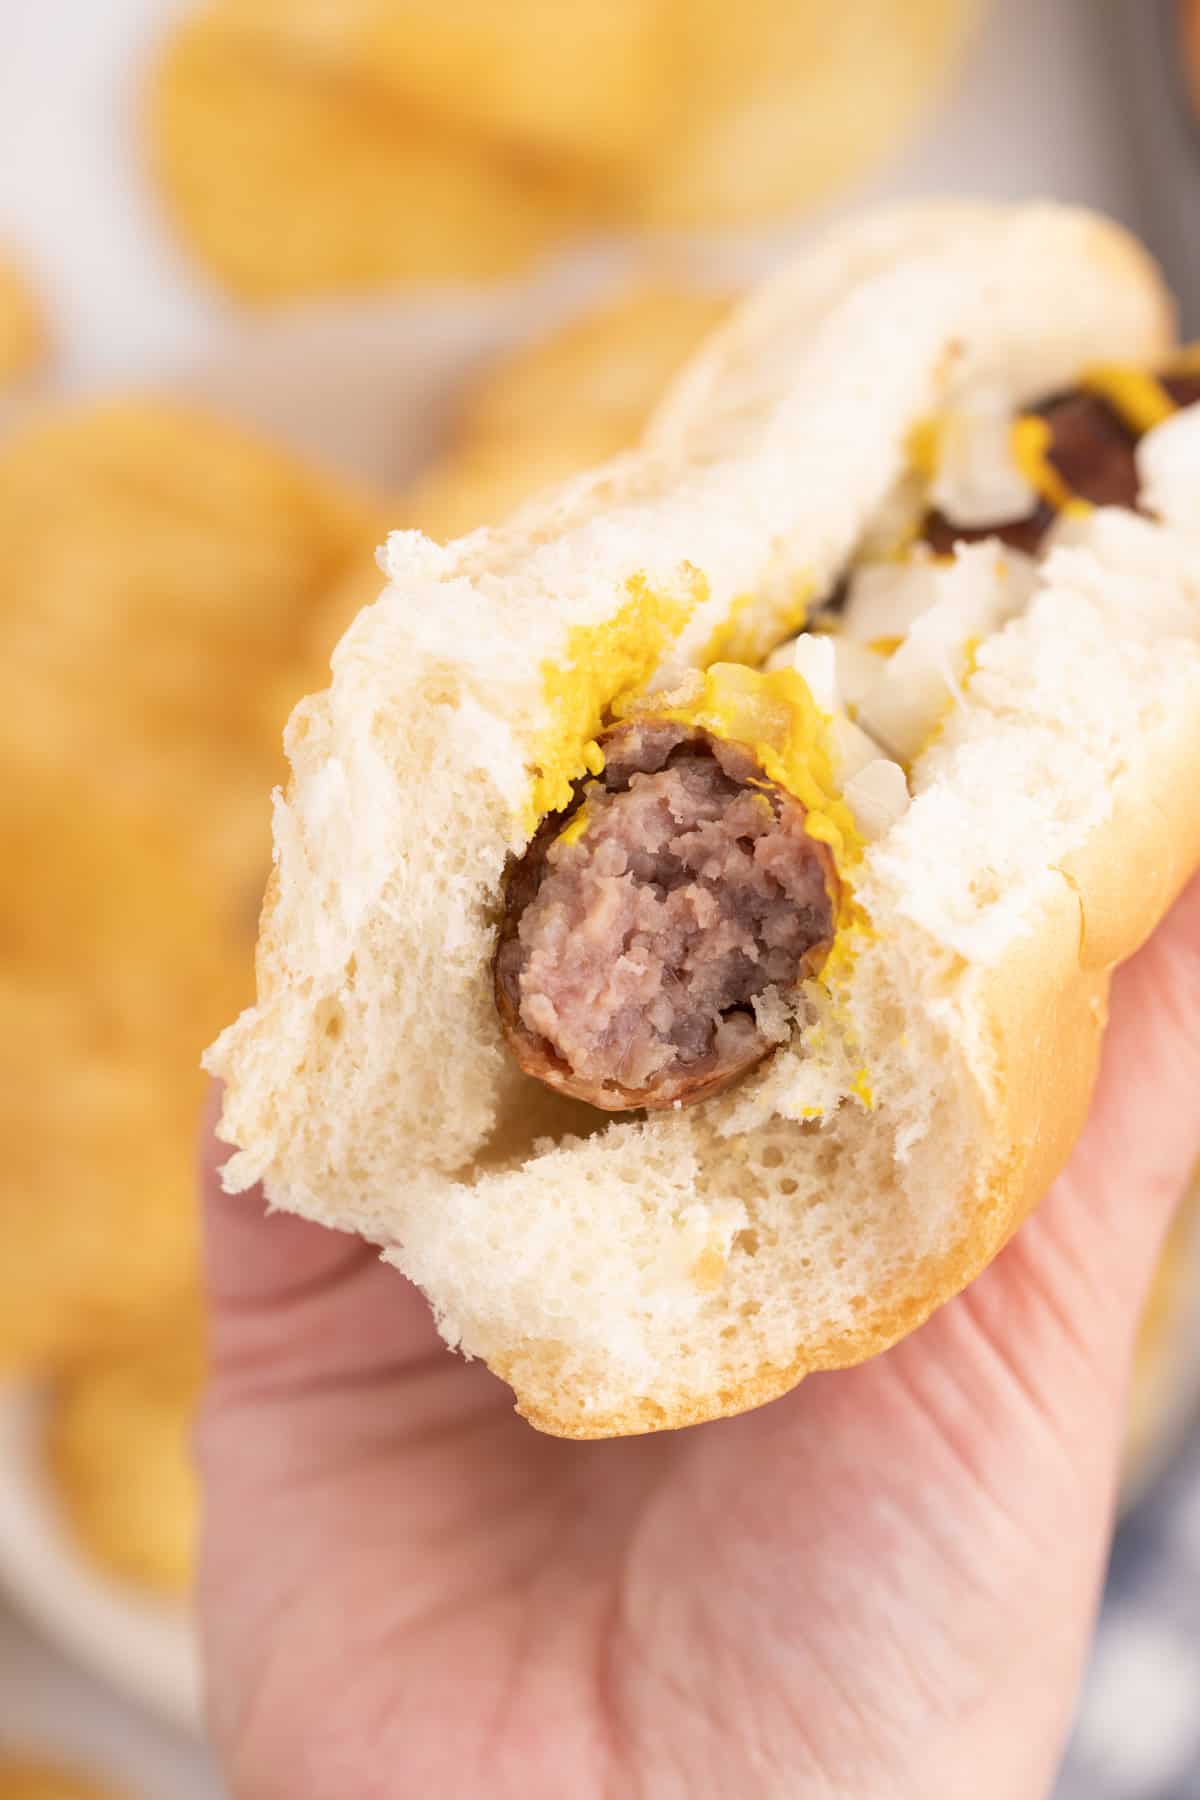 A brat in a roll with a bite taken out of it.